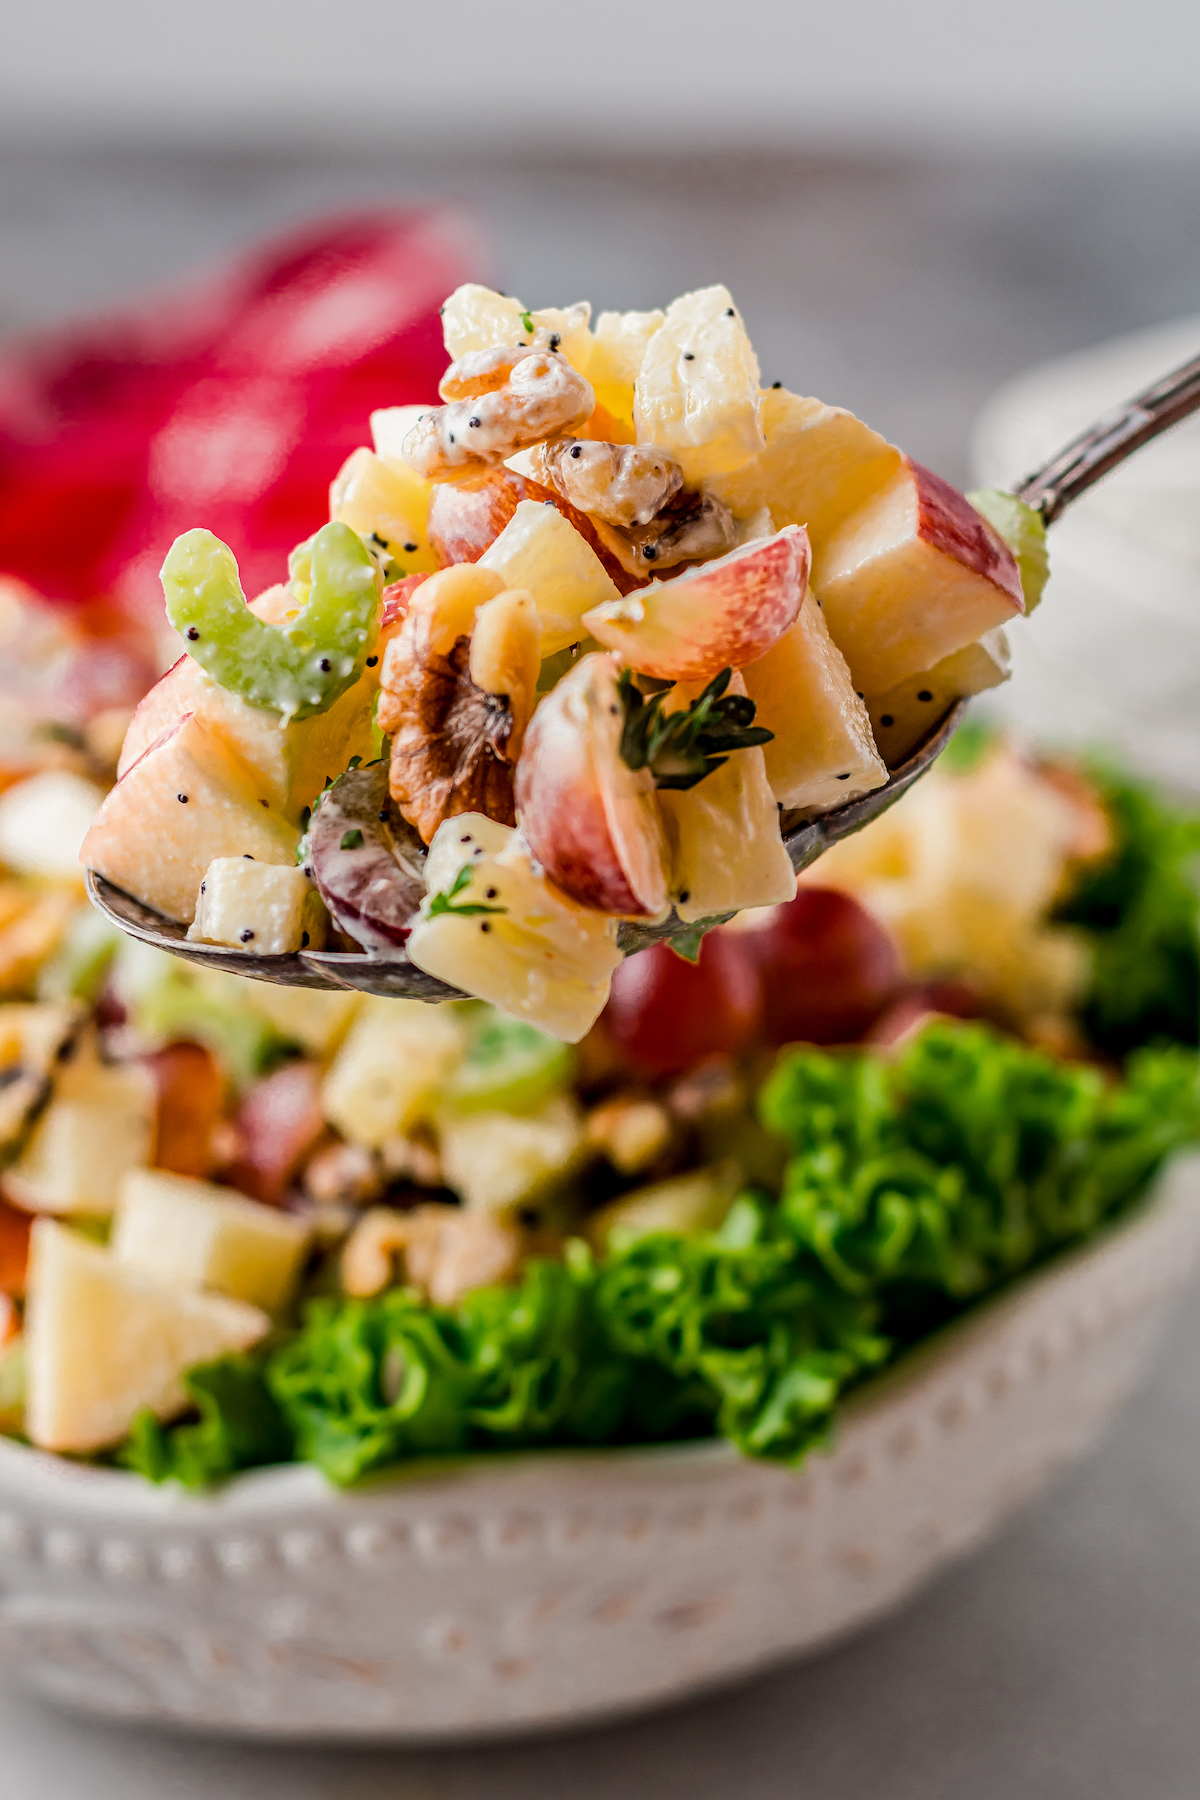 A serving of chopped salad, with a spoon lifting out a portion from the dish toward the camera.